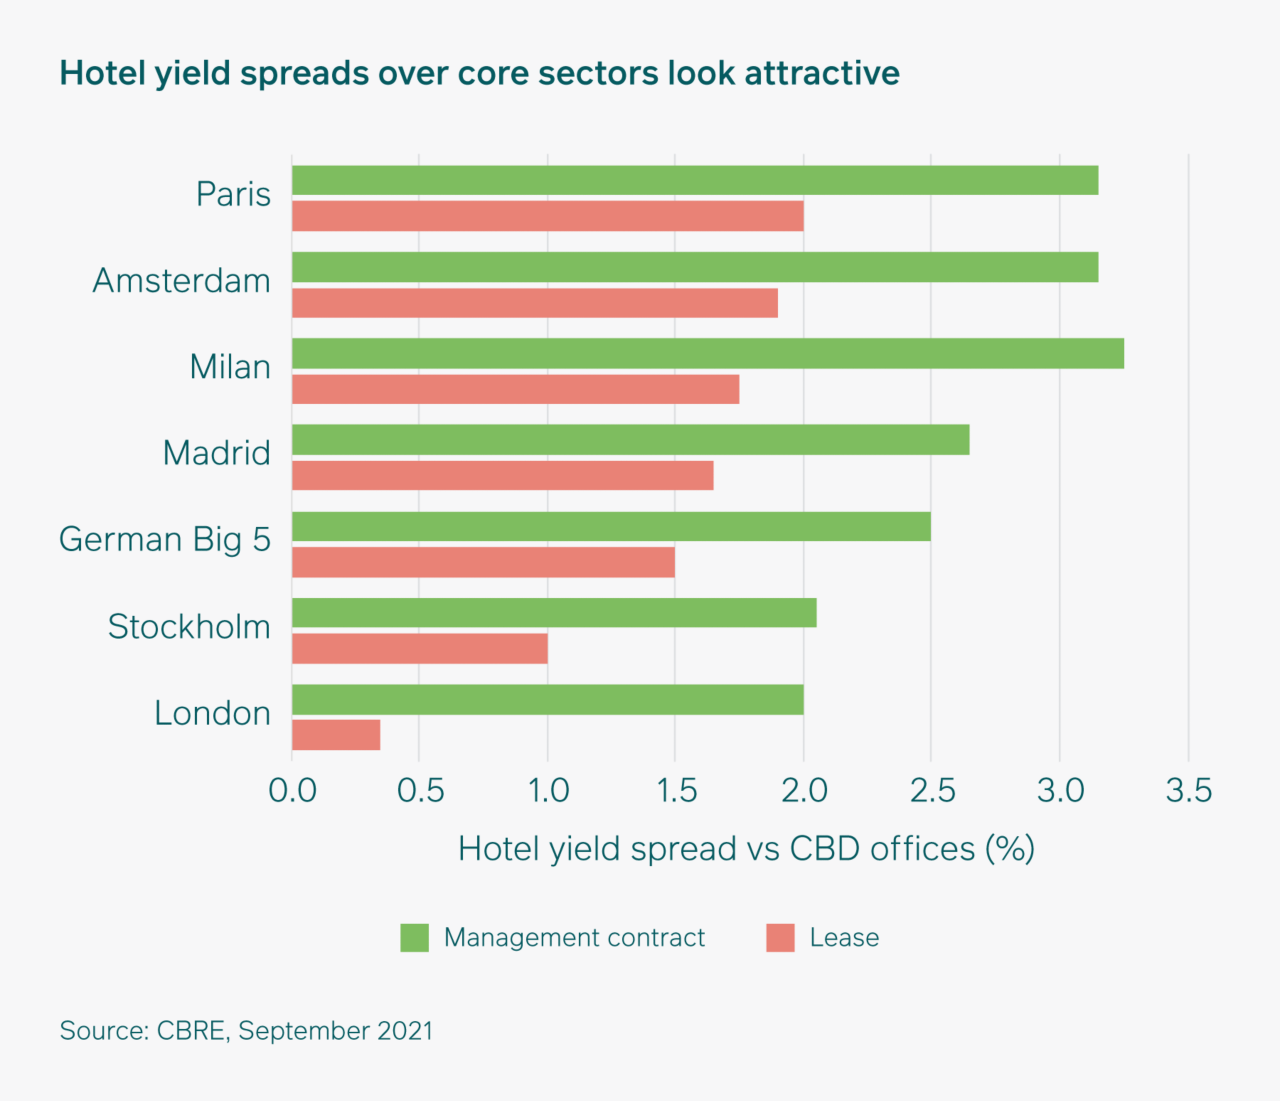 Hotel yield spreads over core sectors look attractive